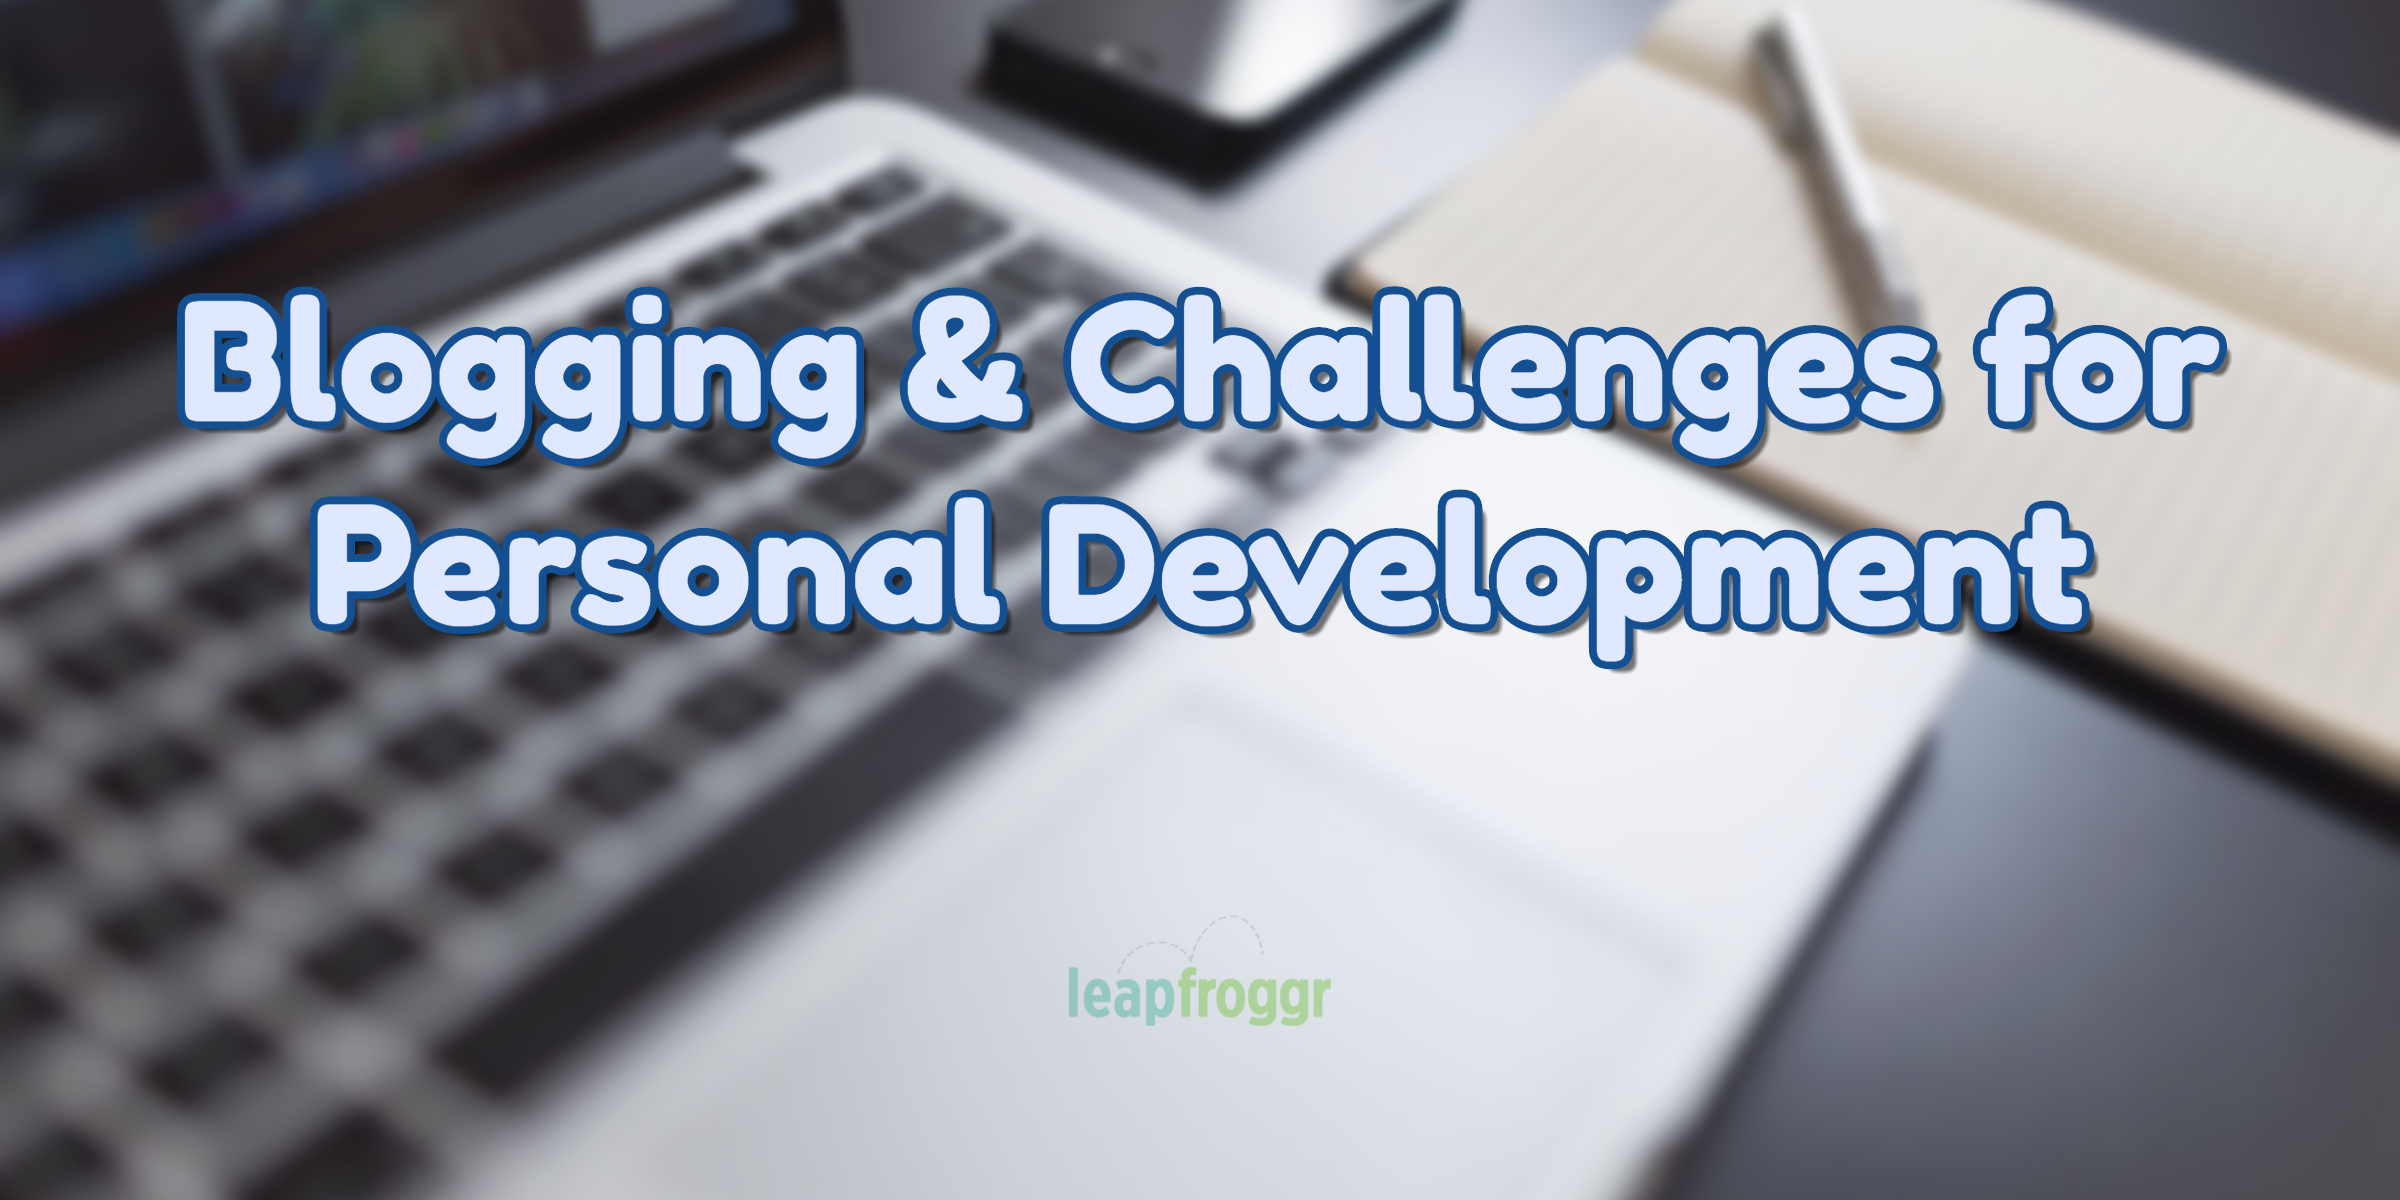 Personal Development through Challenges and Blogging